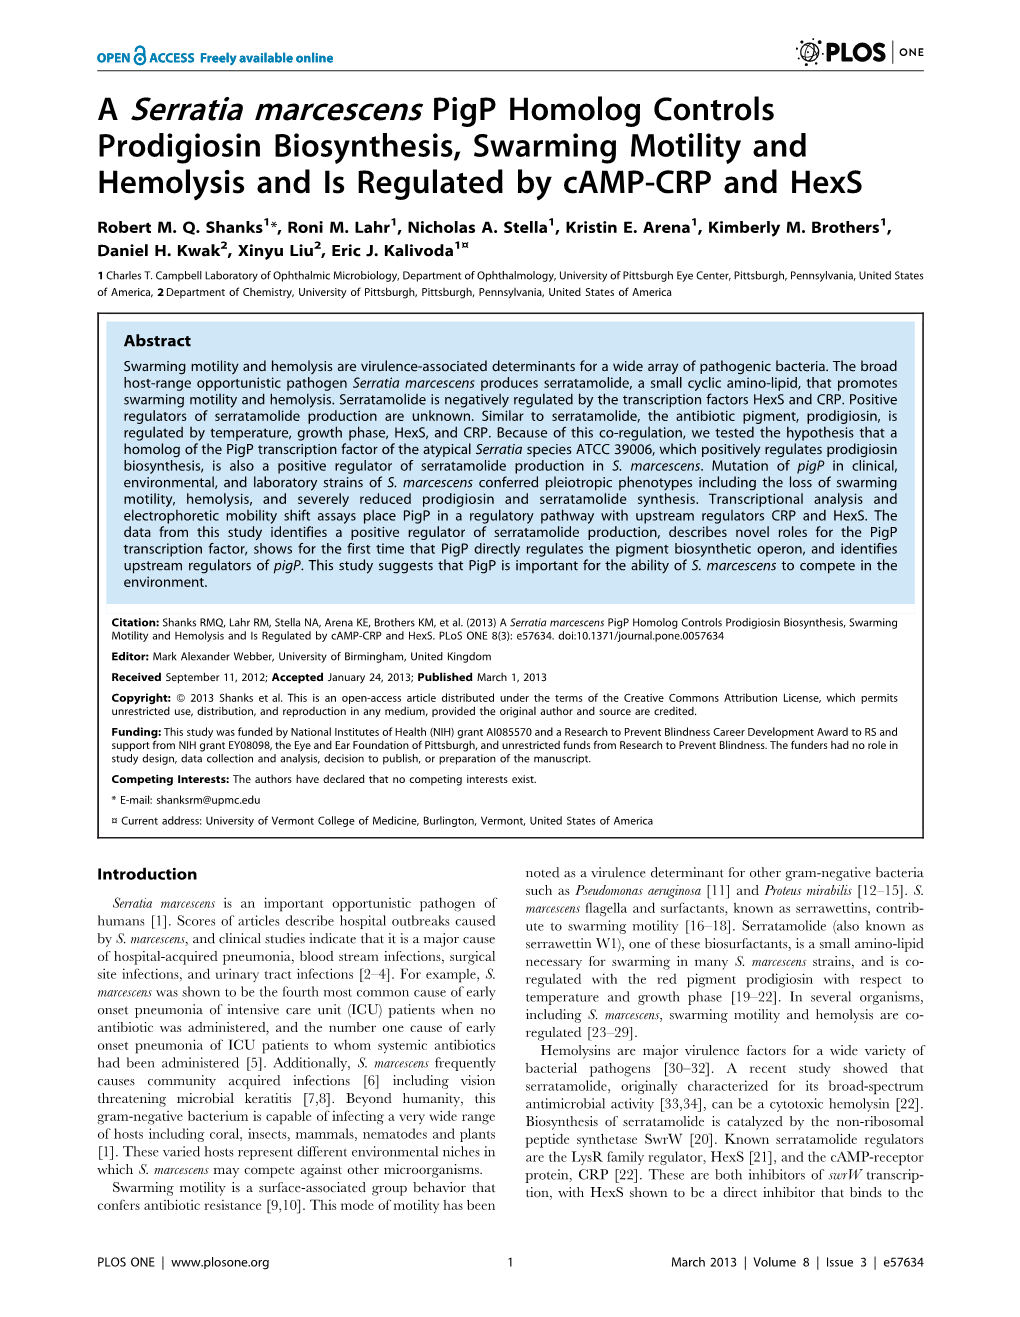 A Serratia Marcescens Pigp Homolog Controls Prodigiosin Biosynthesis, Swarming Motility and Hemolysis and Is Regulated by Camp-CRP and Hexs